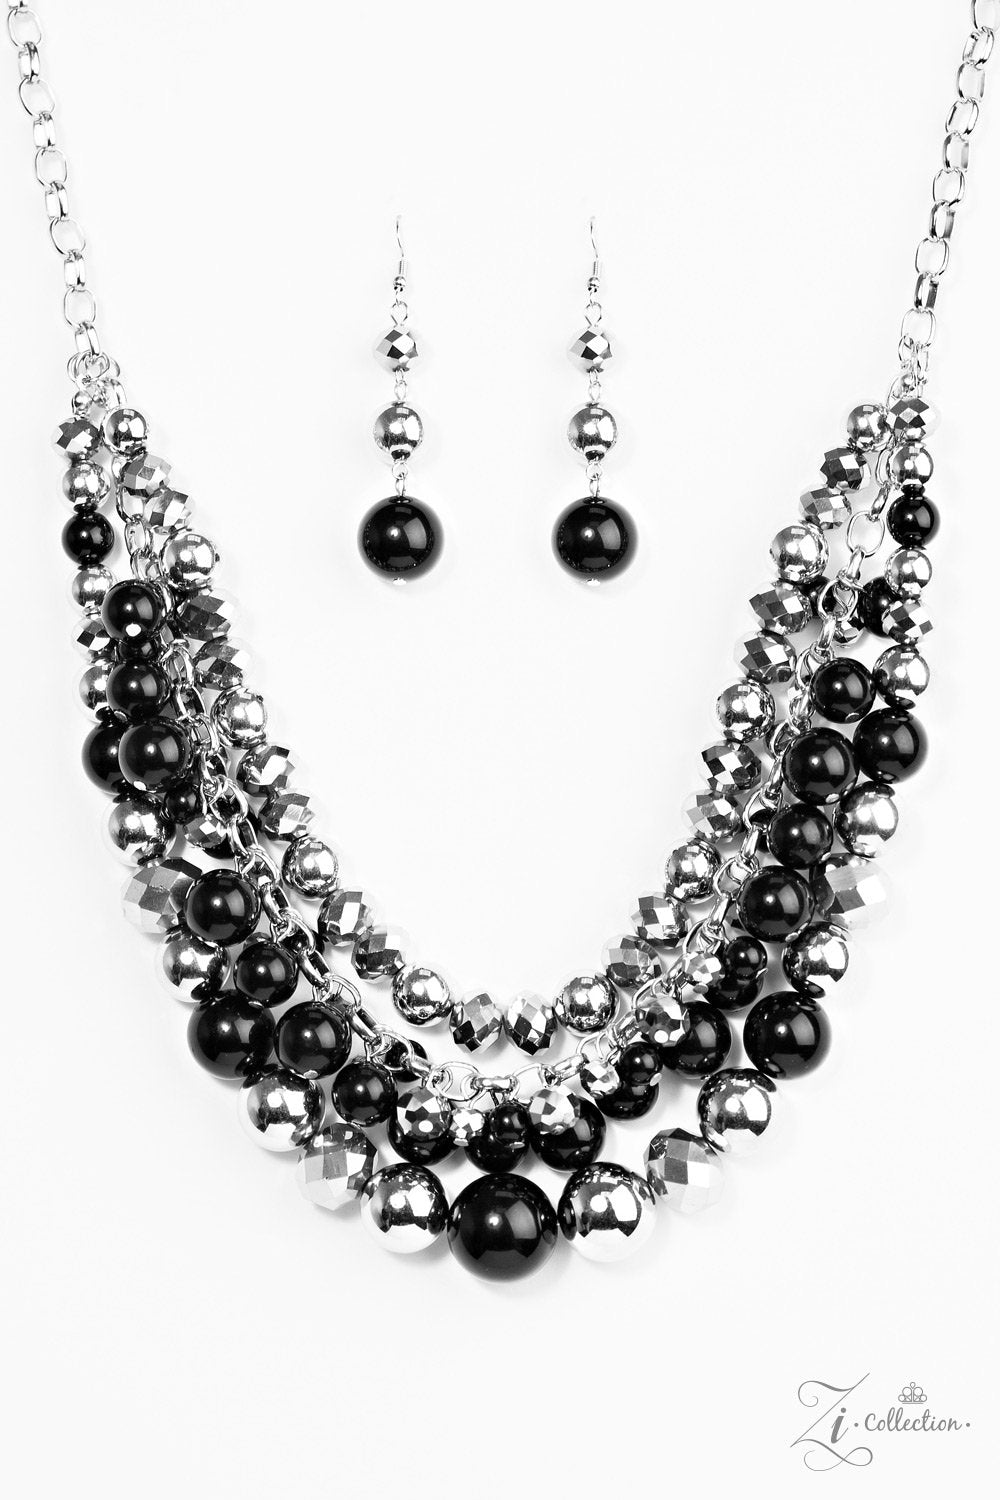 Fame - Zi Collection necklace - Paparazzi necklace